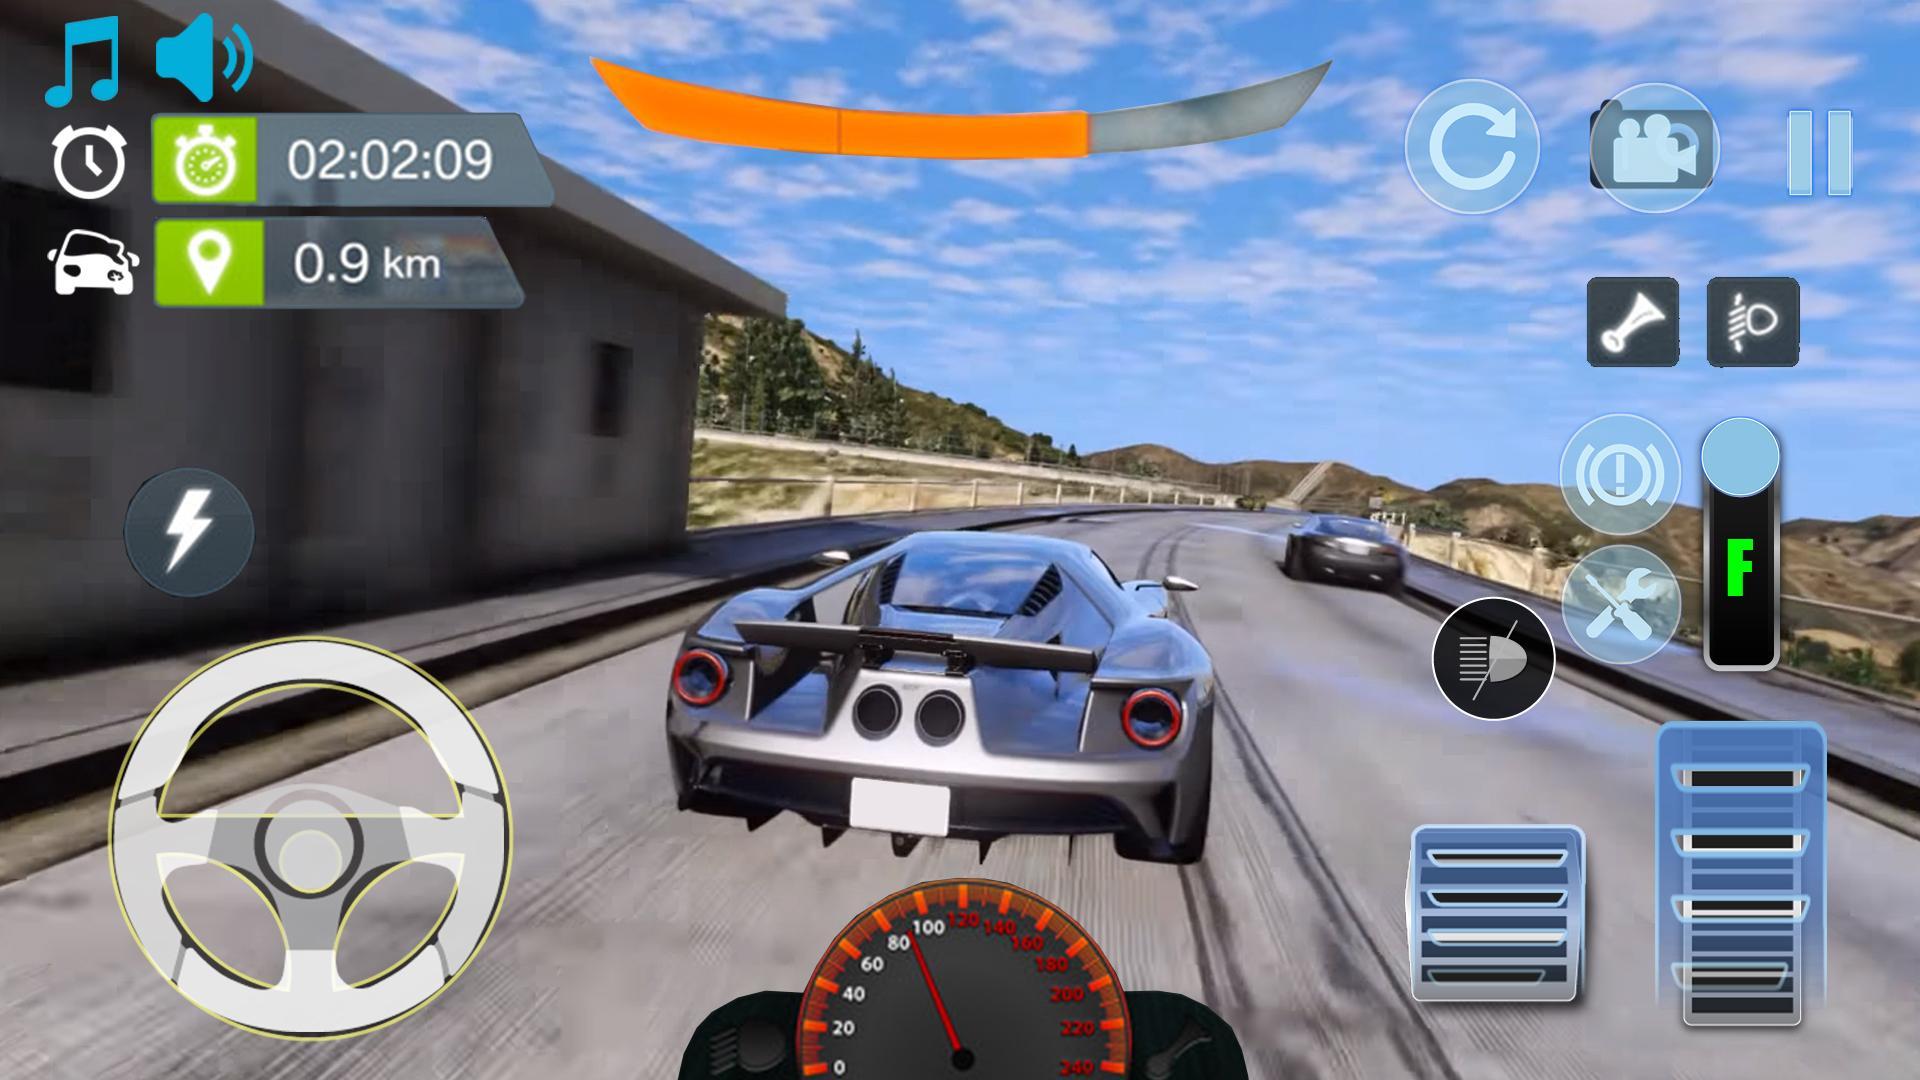 Real City Ford Driving Simulator 2019 For Android Apk Download - roblox vehicle simulator thunderbird